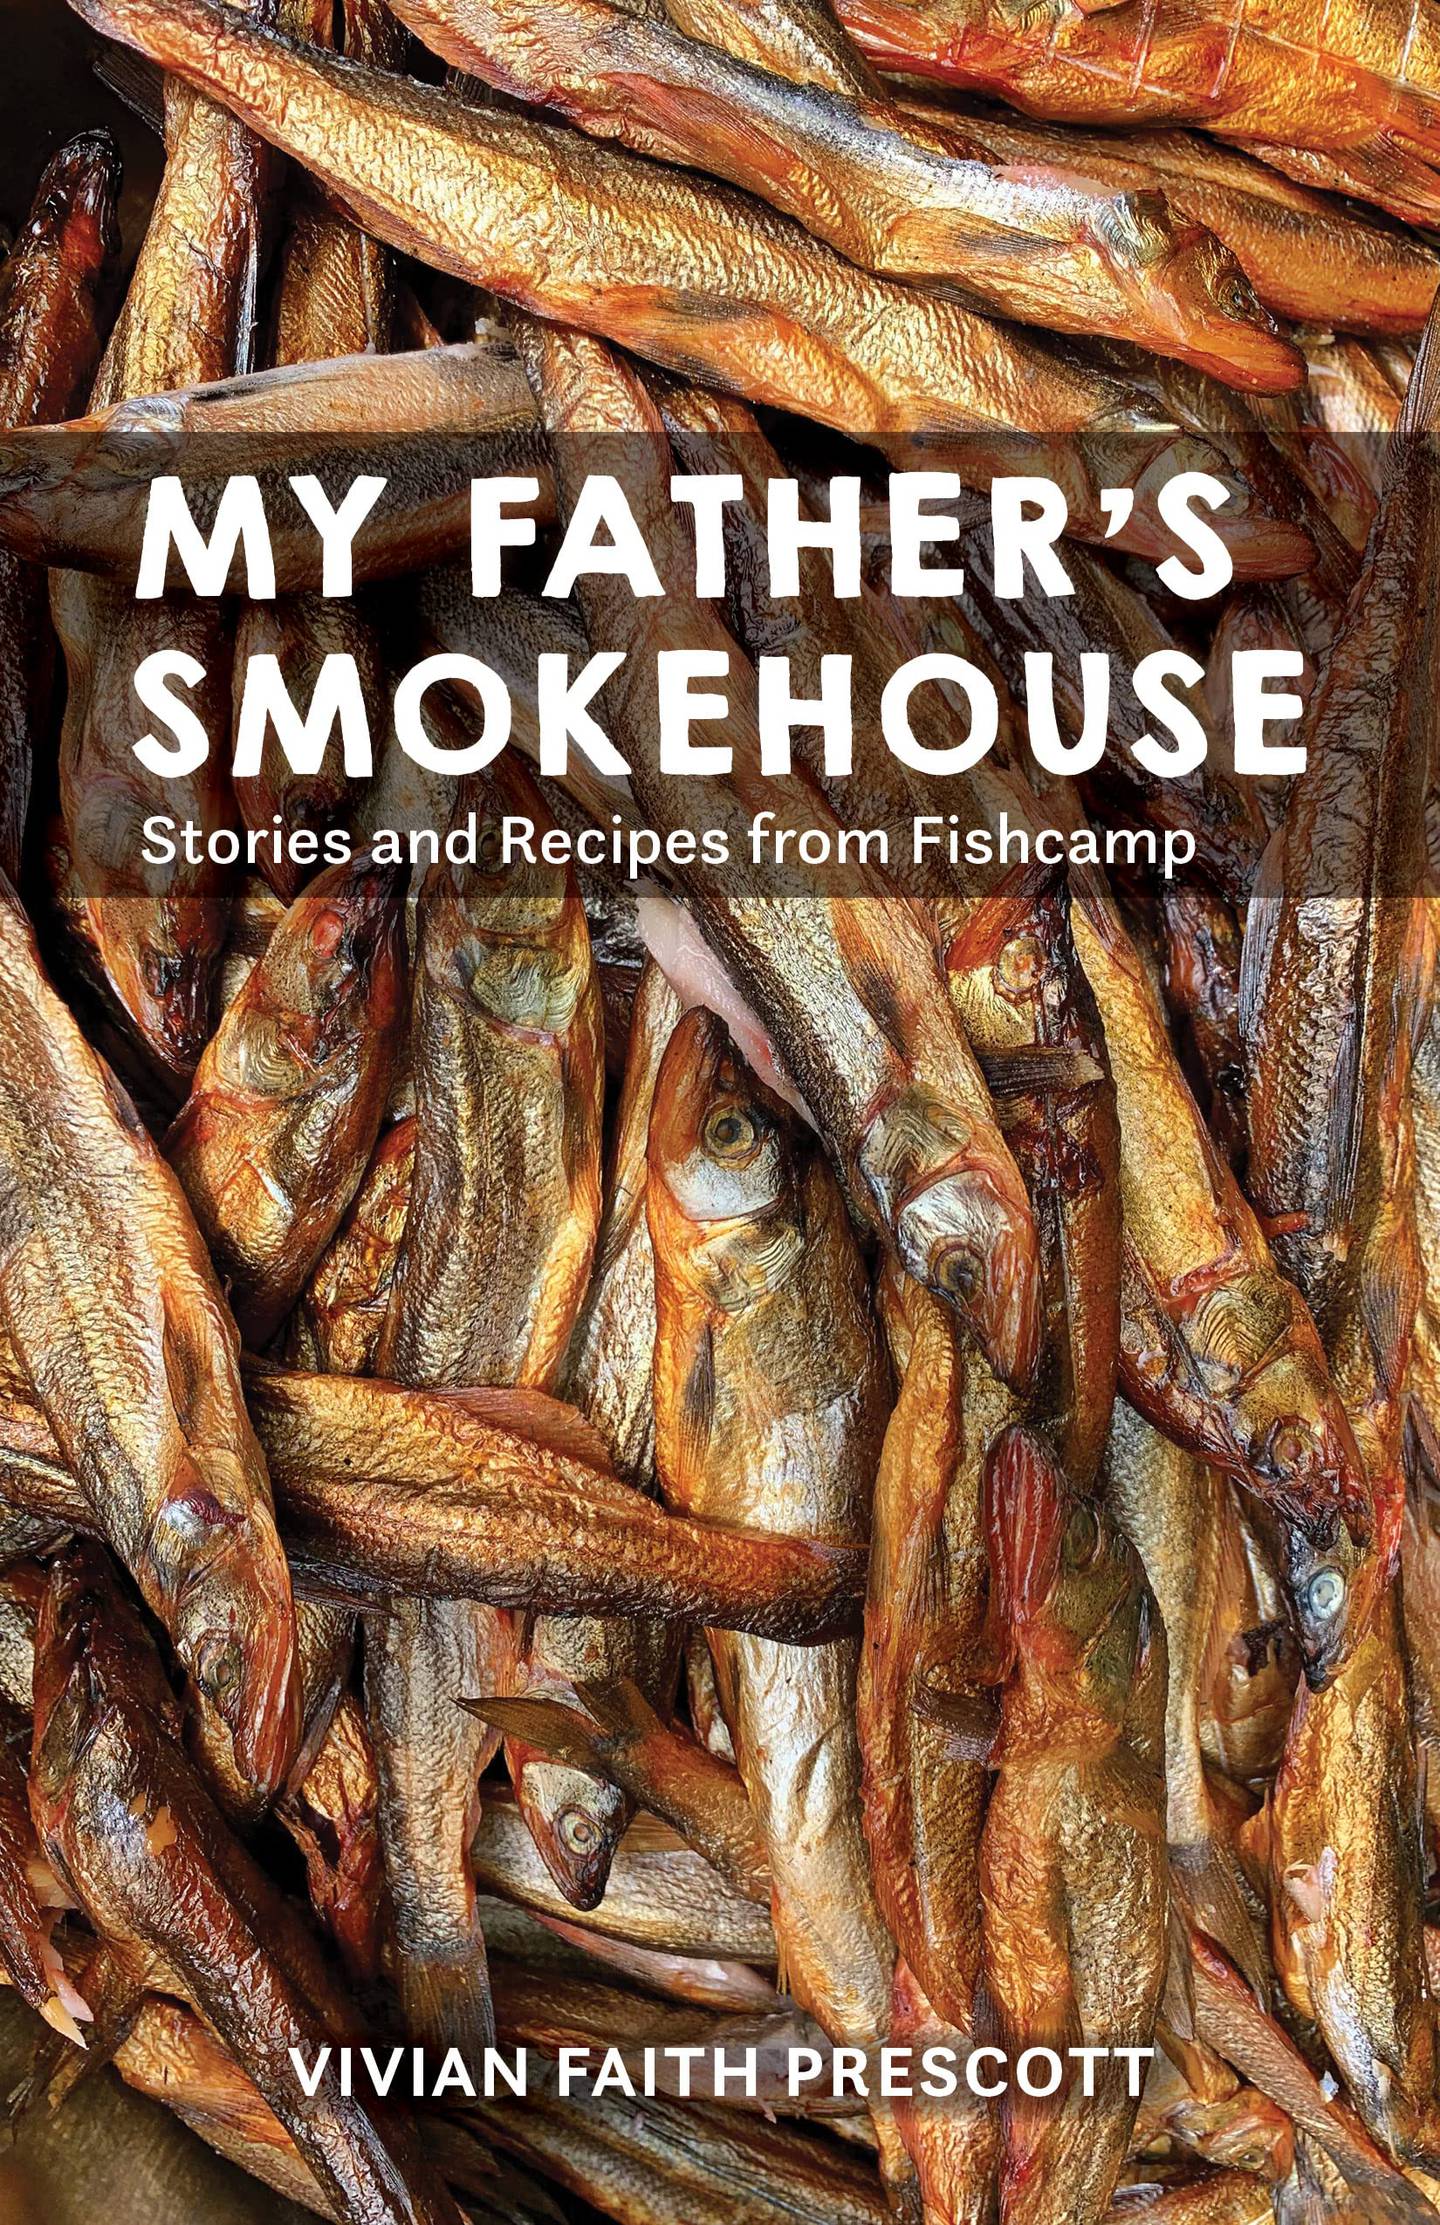 “My Father’s Smokehouse: Stories and Recipes from Fishcamp” by Vivian Faith Prescott